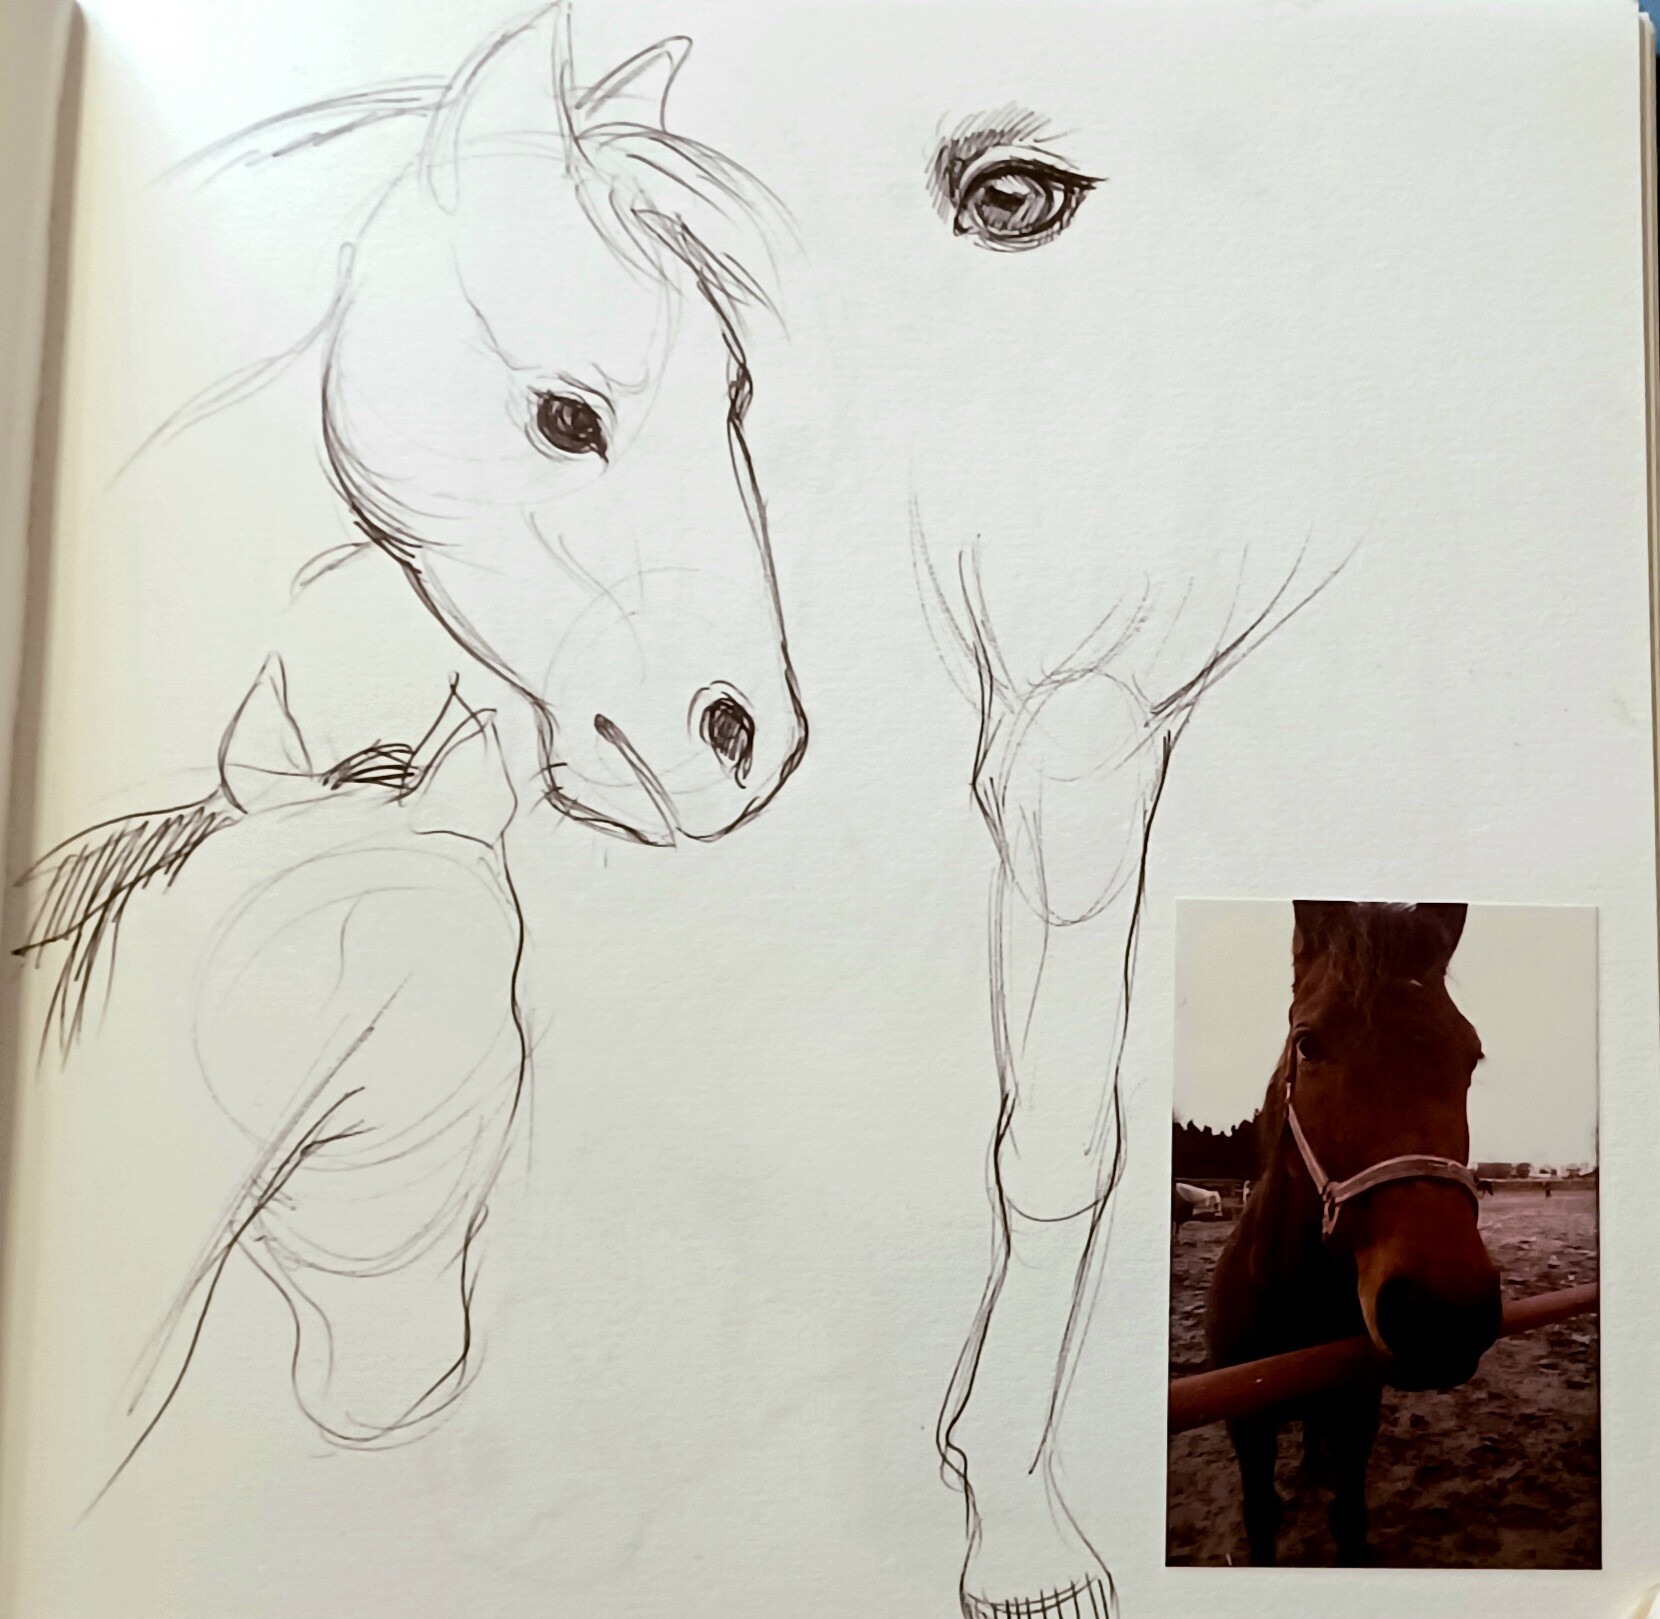 Project: Drawing animals (sketches from life and from photos)